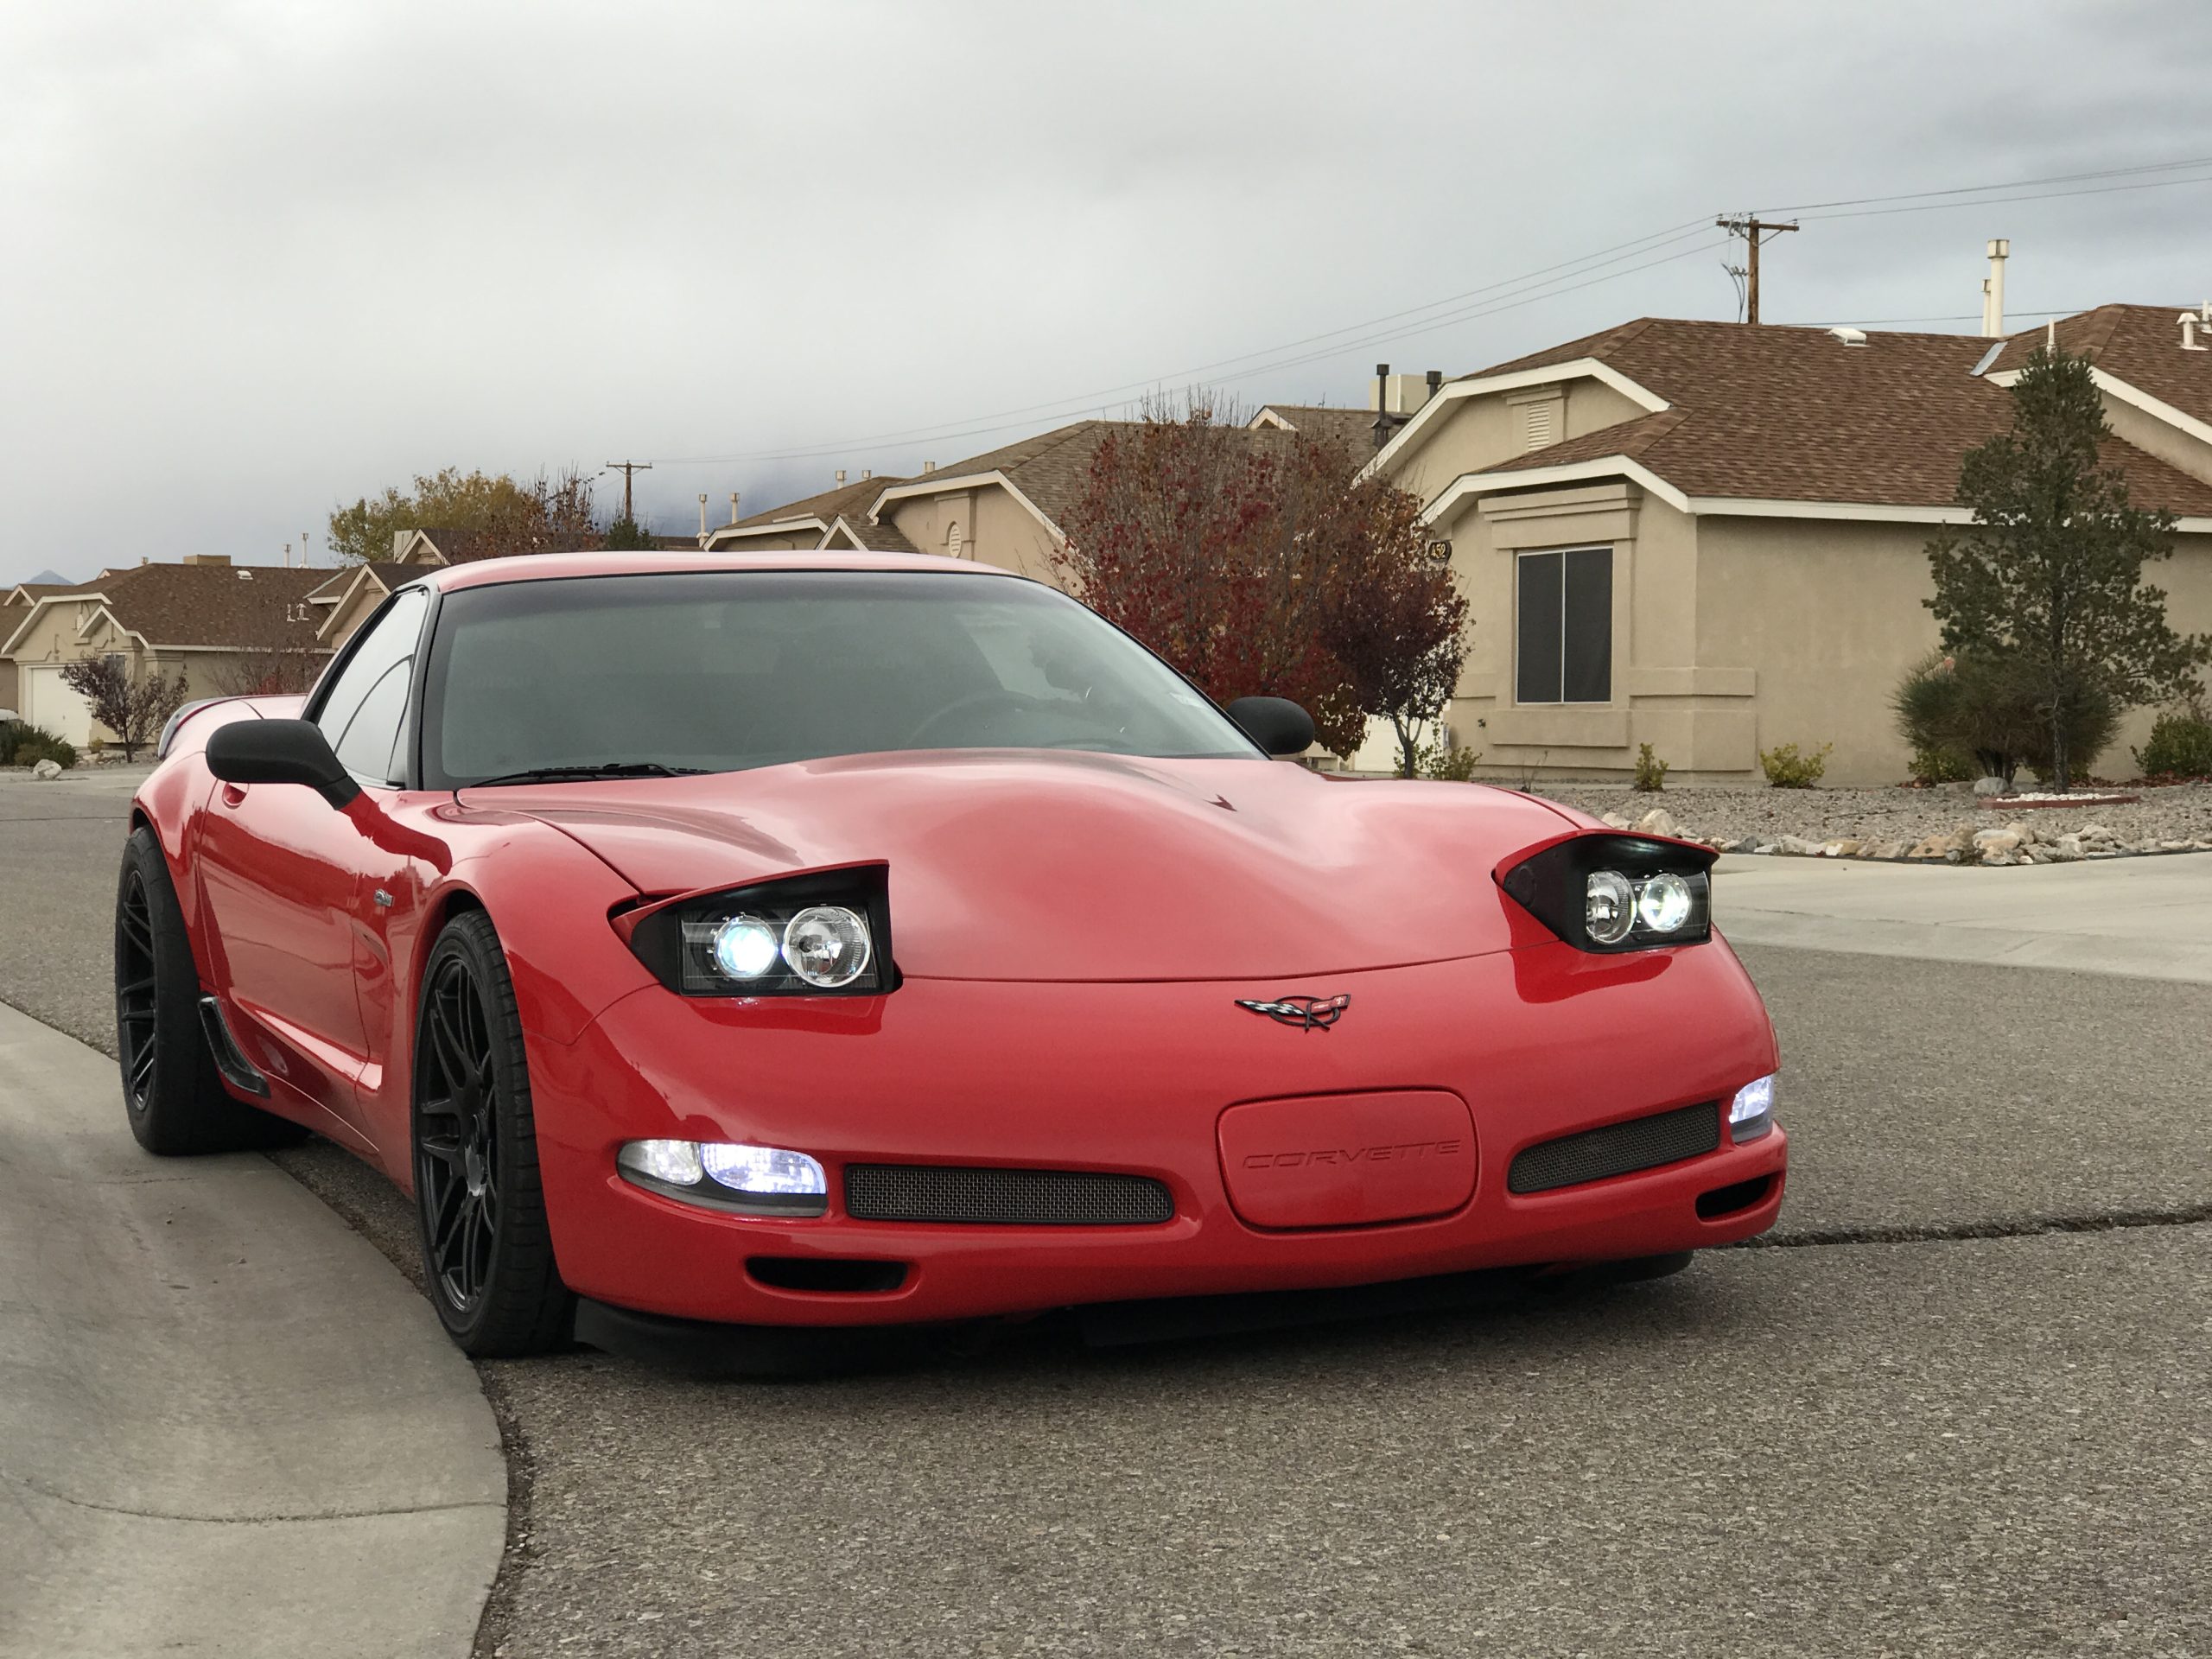 C5 Corvette with aftermarket headlights